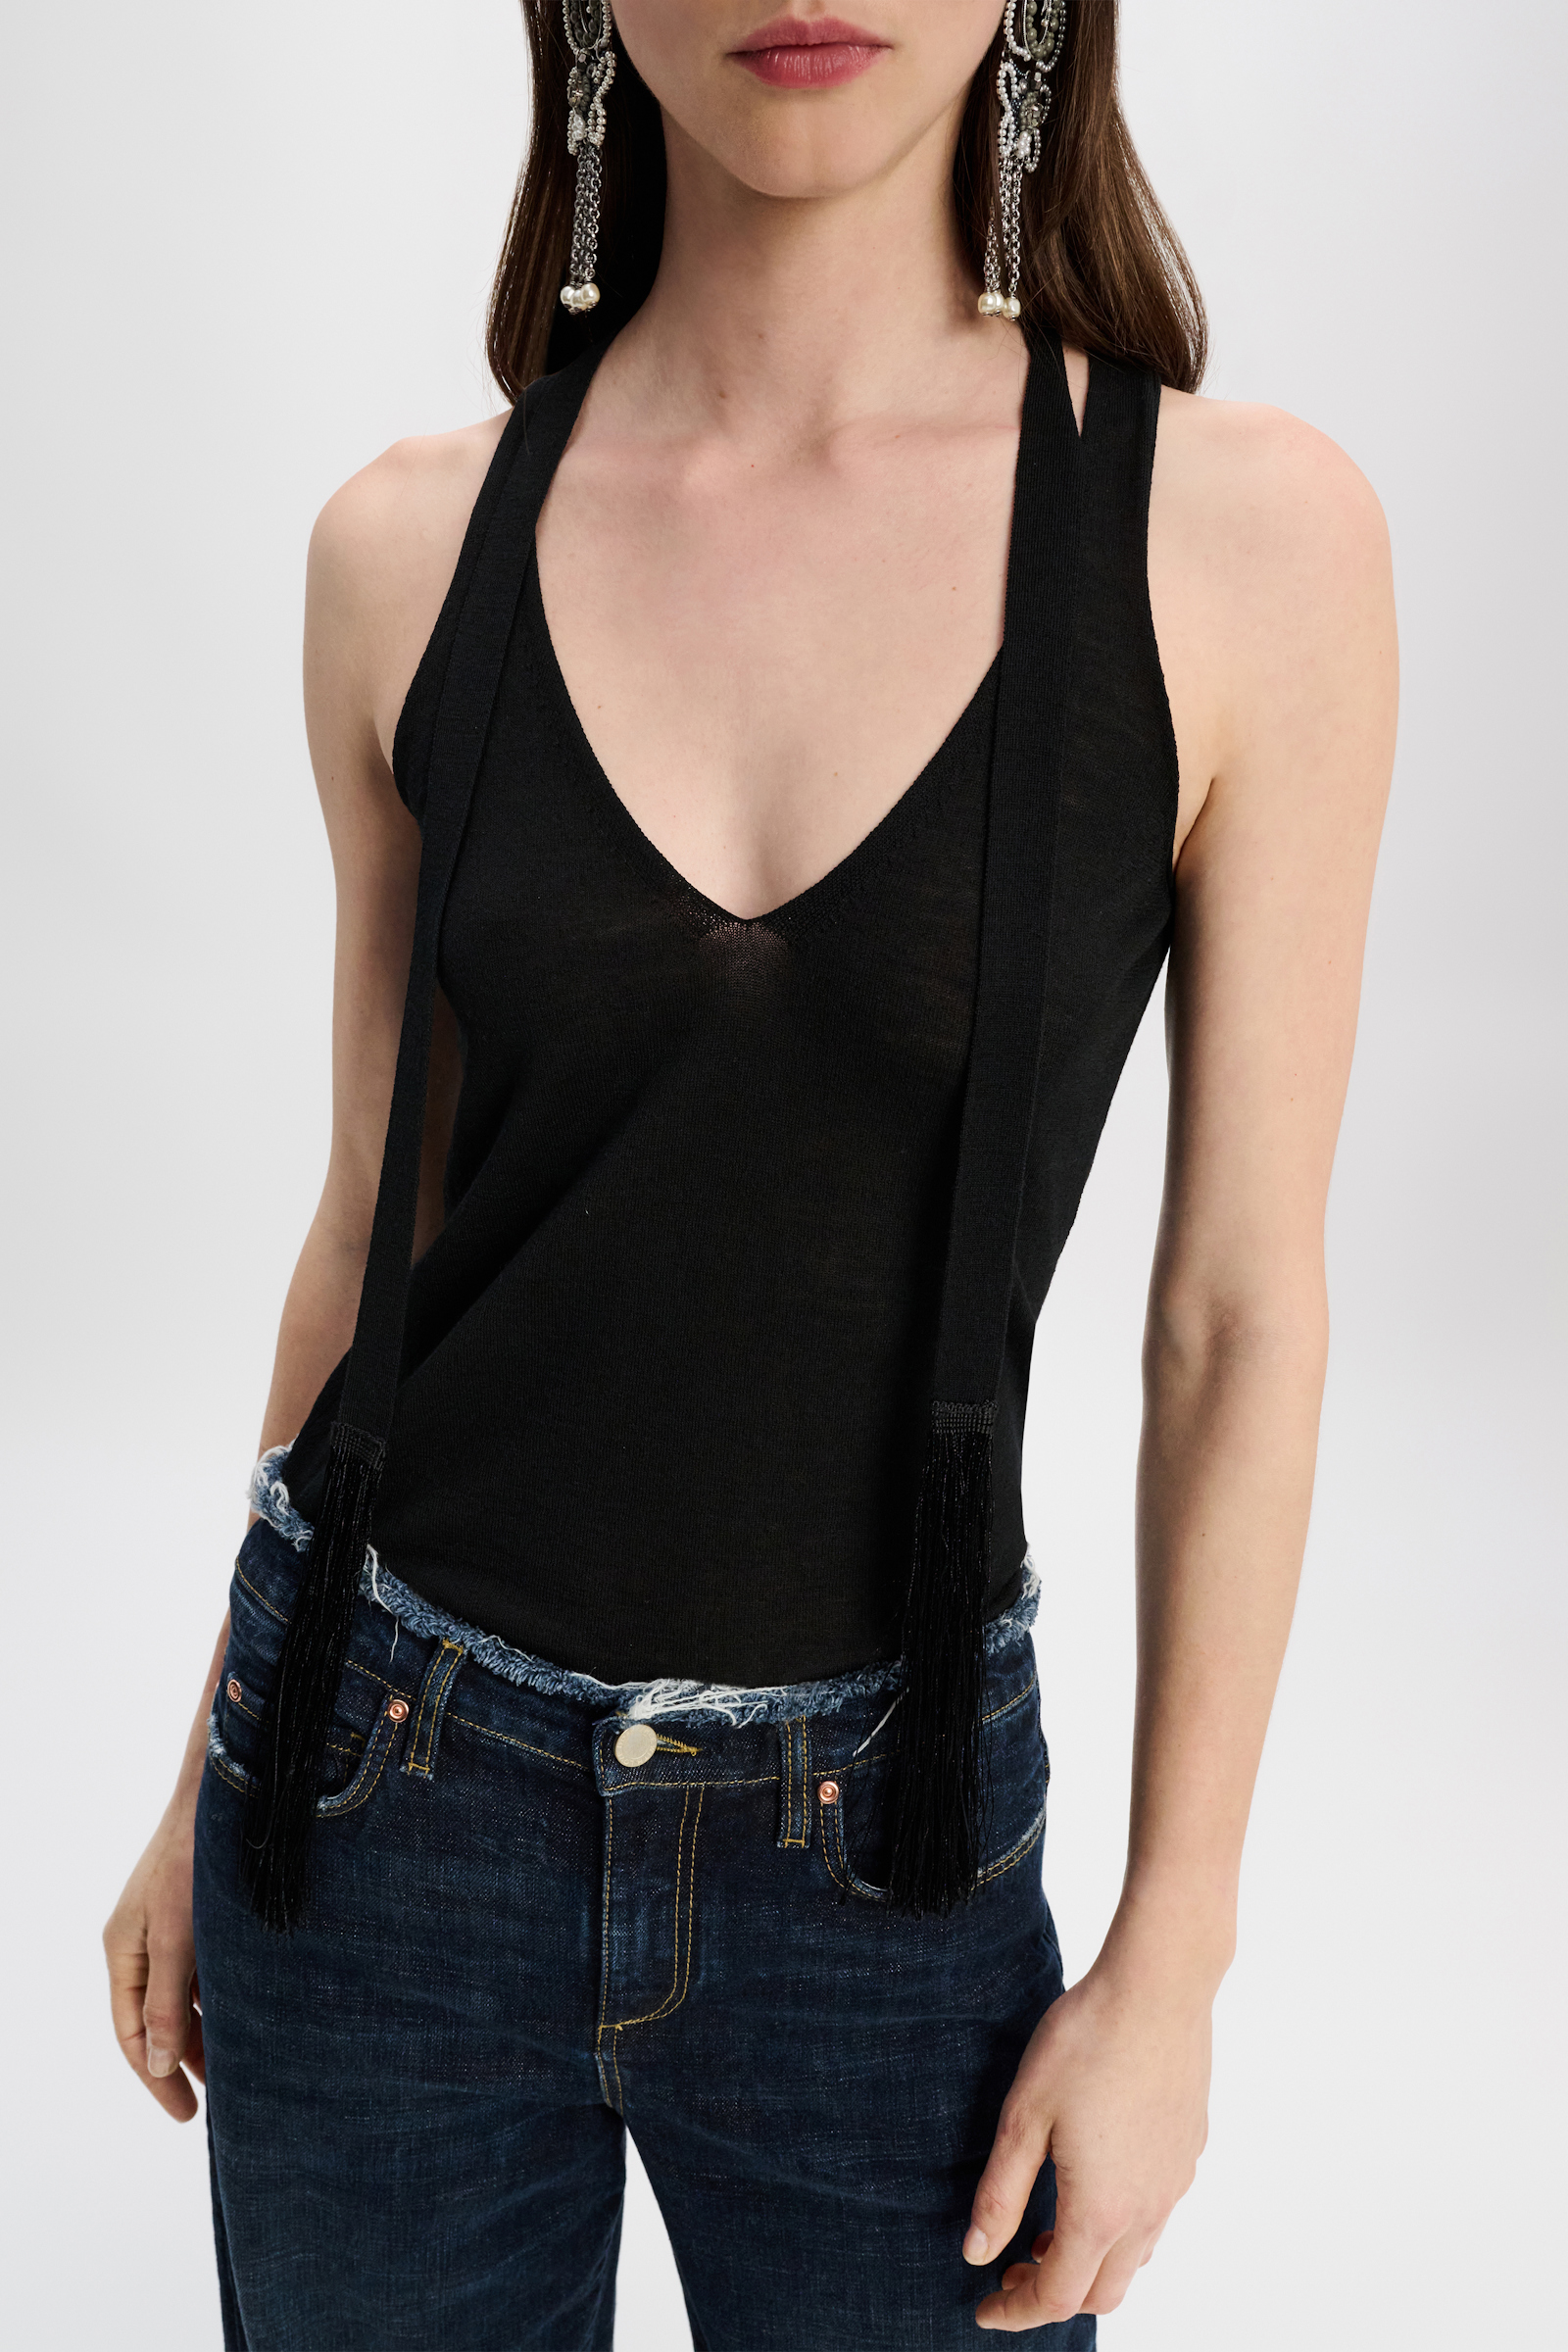 Dorothee Schumacher V-neck tank top with fringed tie pure black